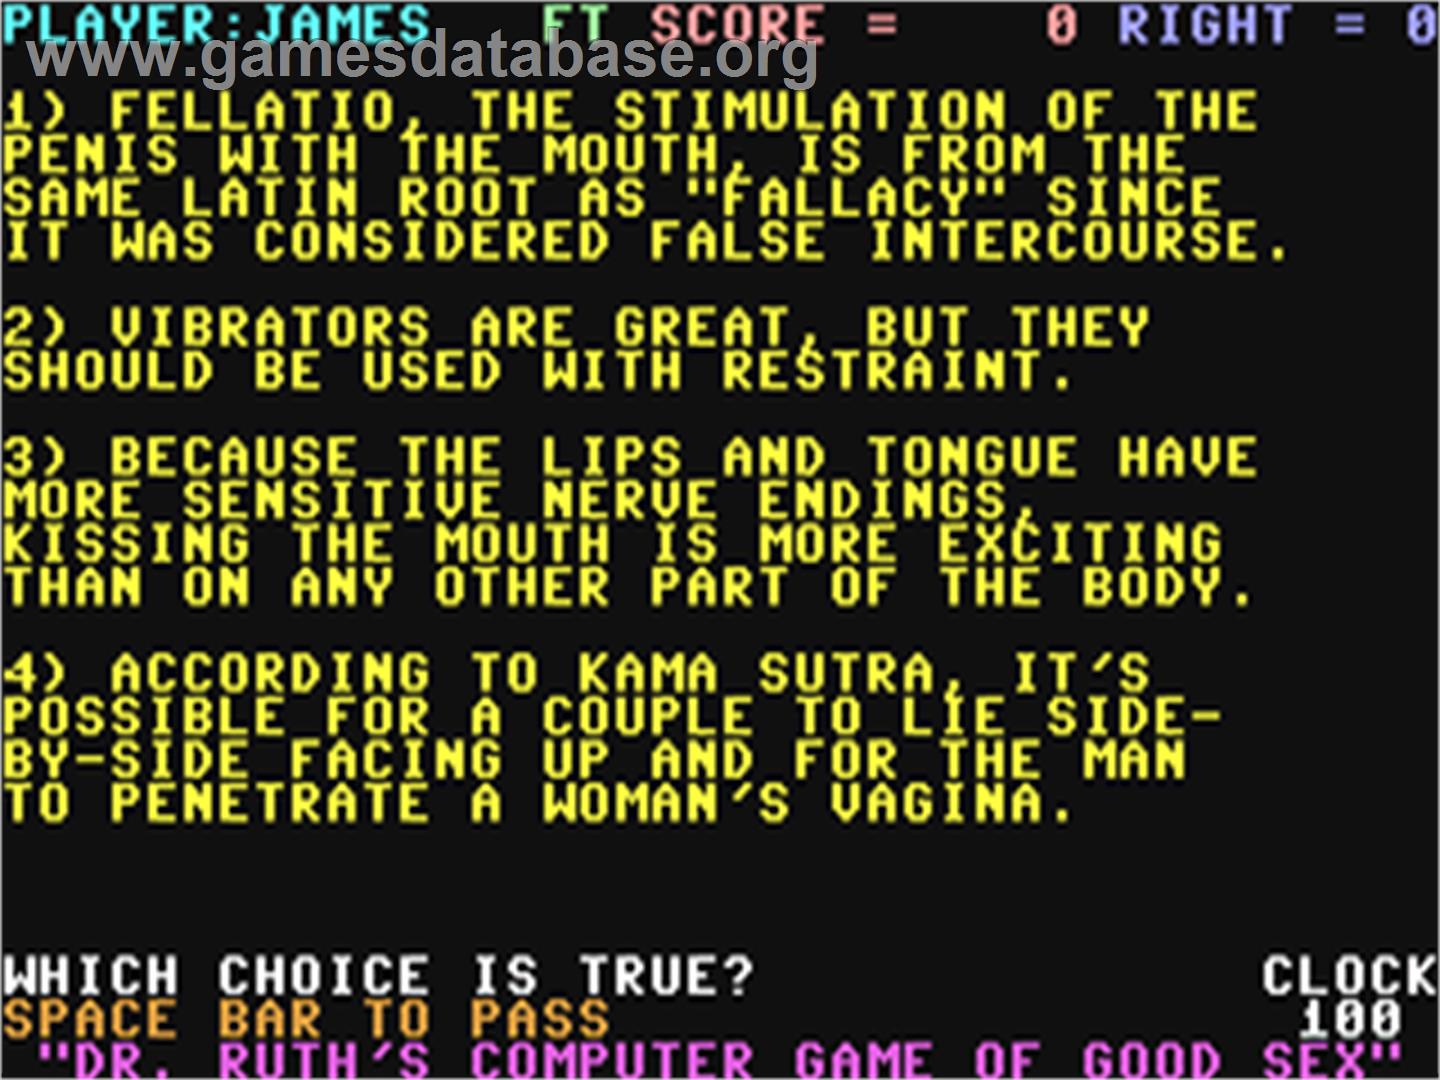 Dr. Ruth's Computer Game of Good Sex - Commodore 64 - Artwork - In Game